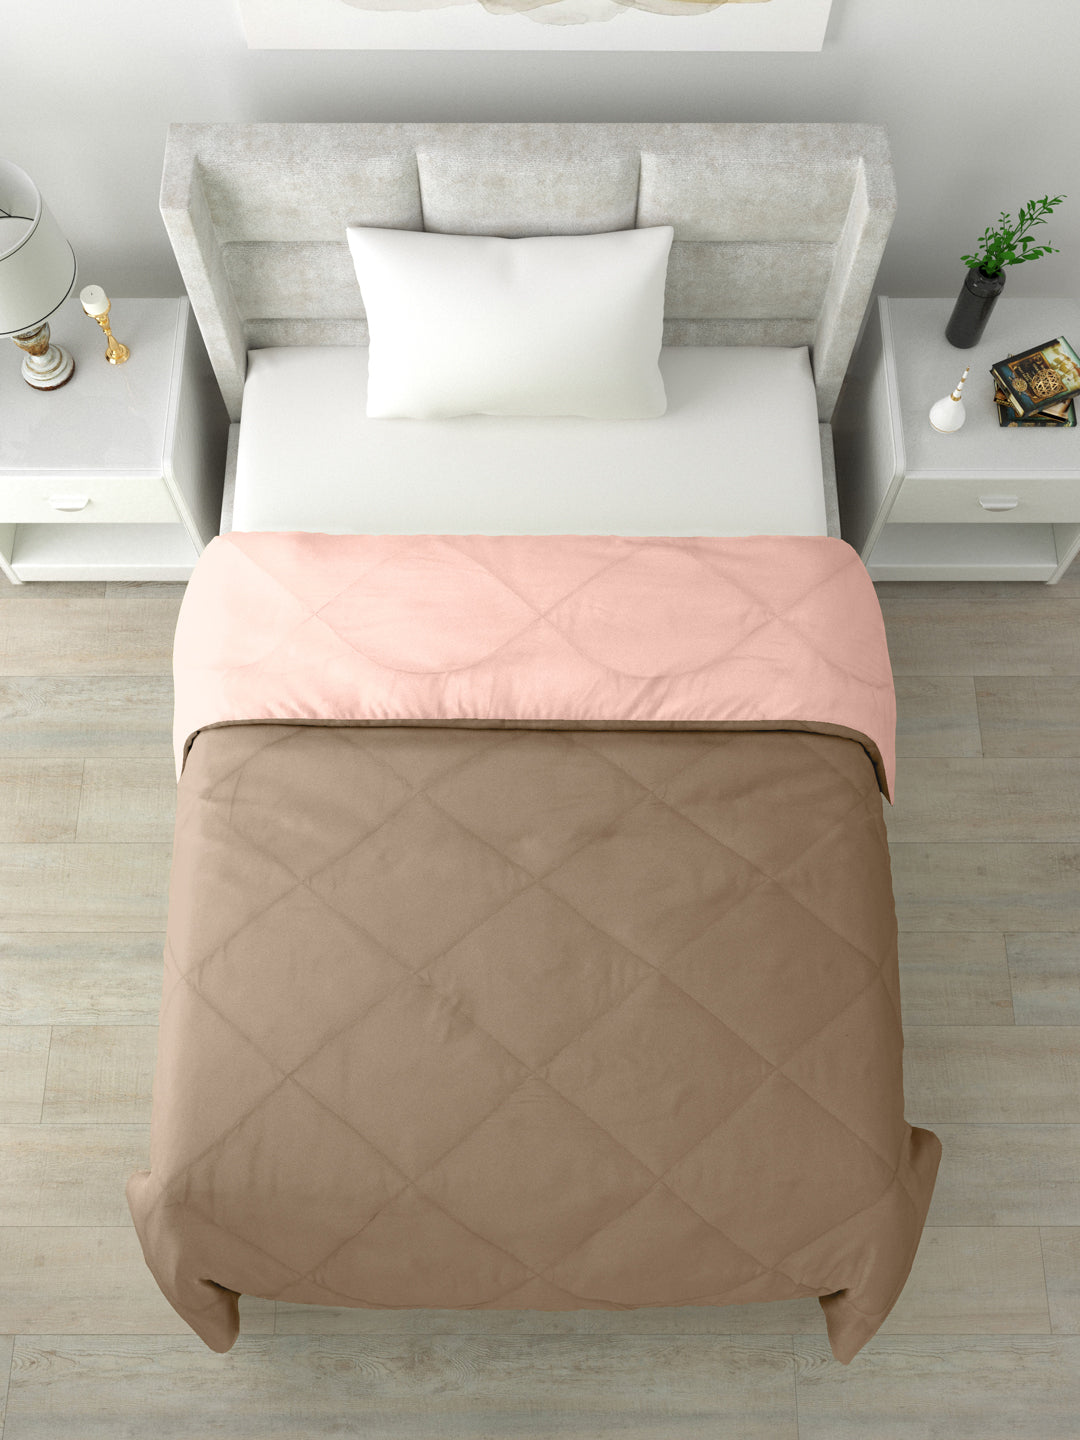 Reversible Single Bed Comforter 200 GSM 60x90 Inches (Peach & Taupe)